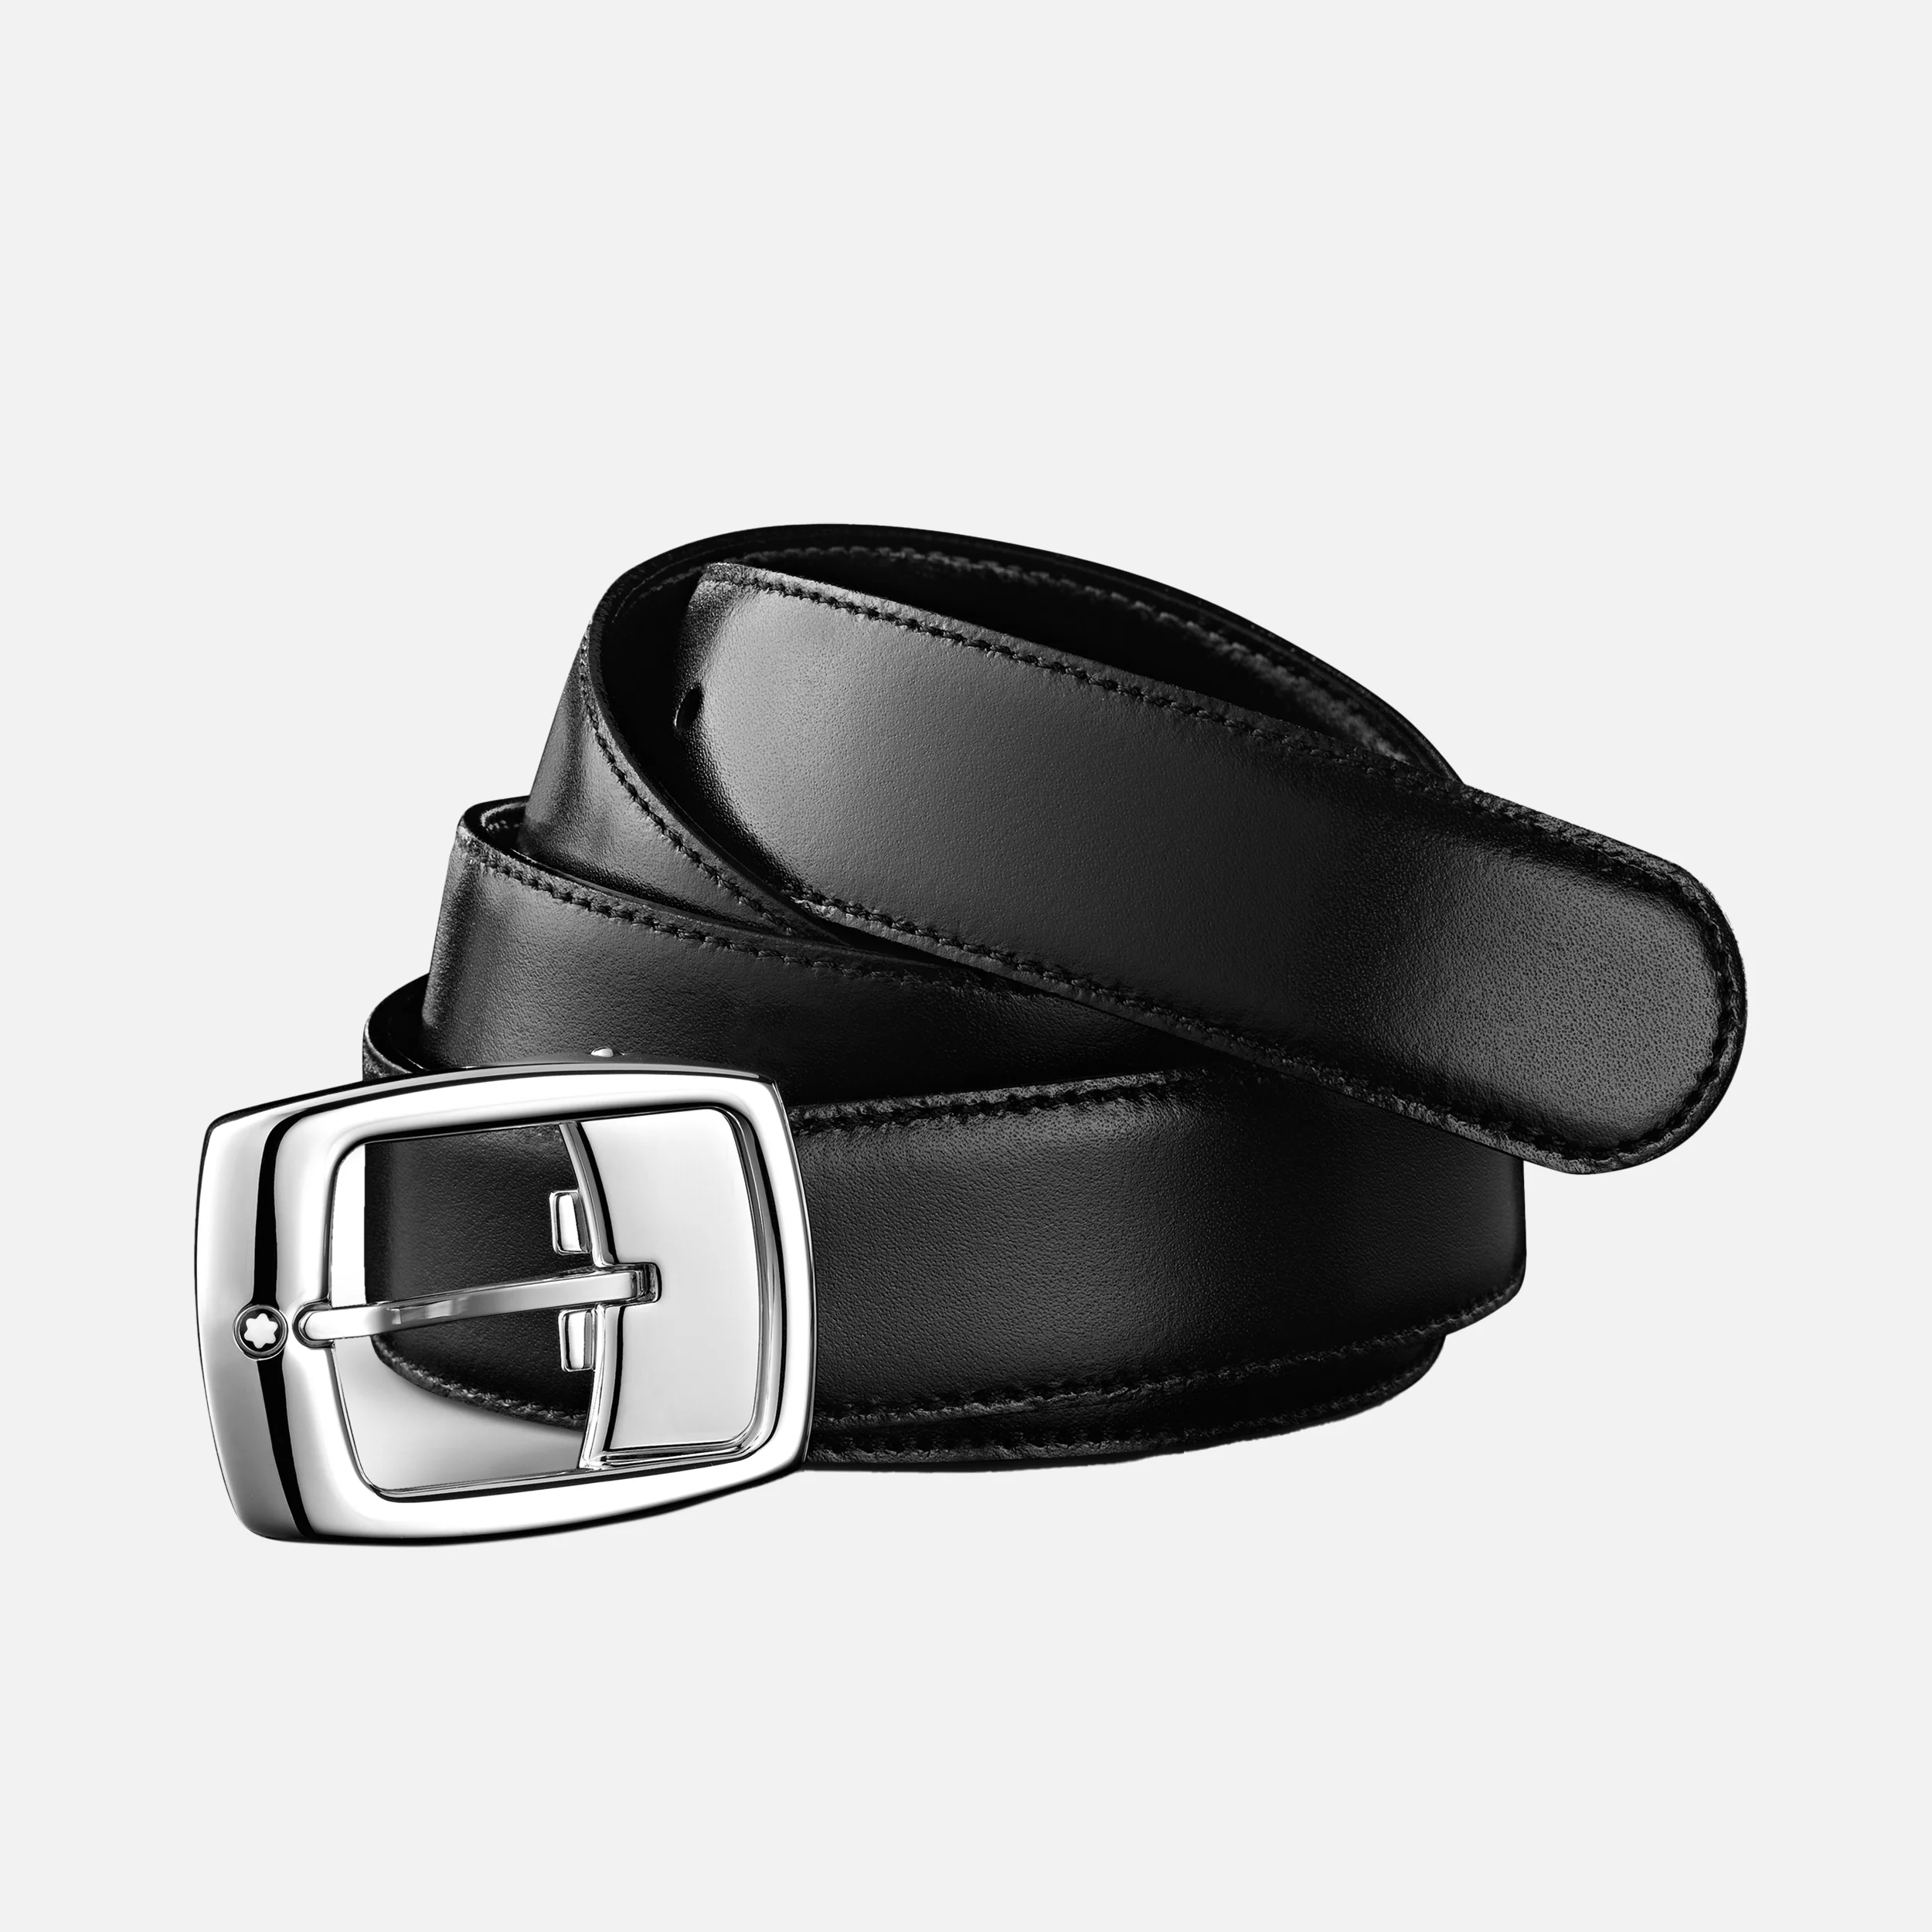 Montblanc Belt Rounded Rectangle Shiny Palladium Buckle Reversible Leather Black Brown 30mm - Pencraft the boutique